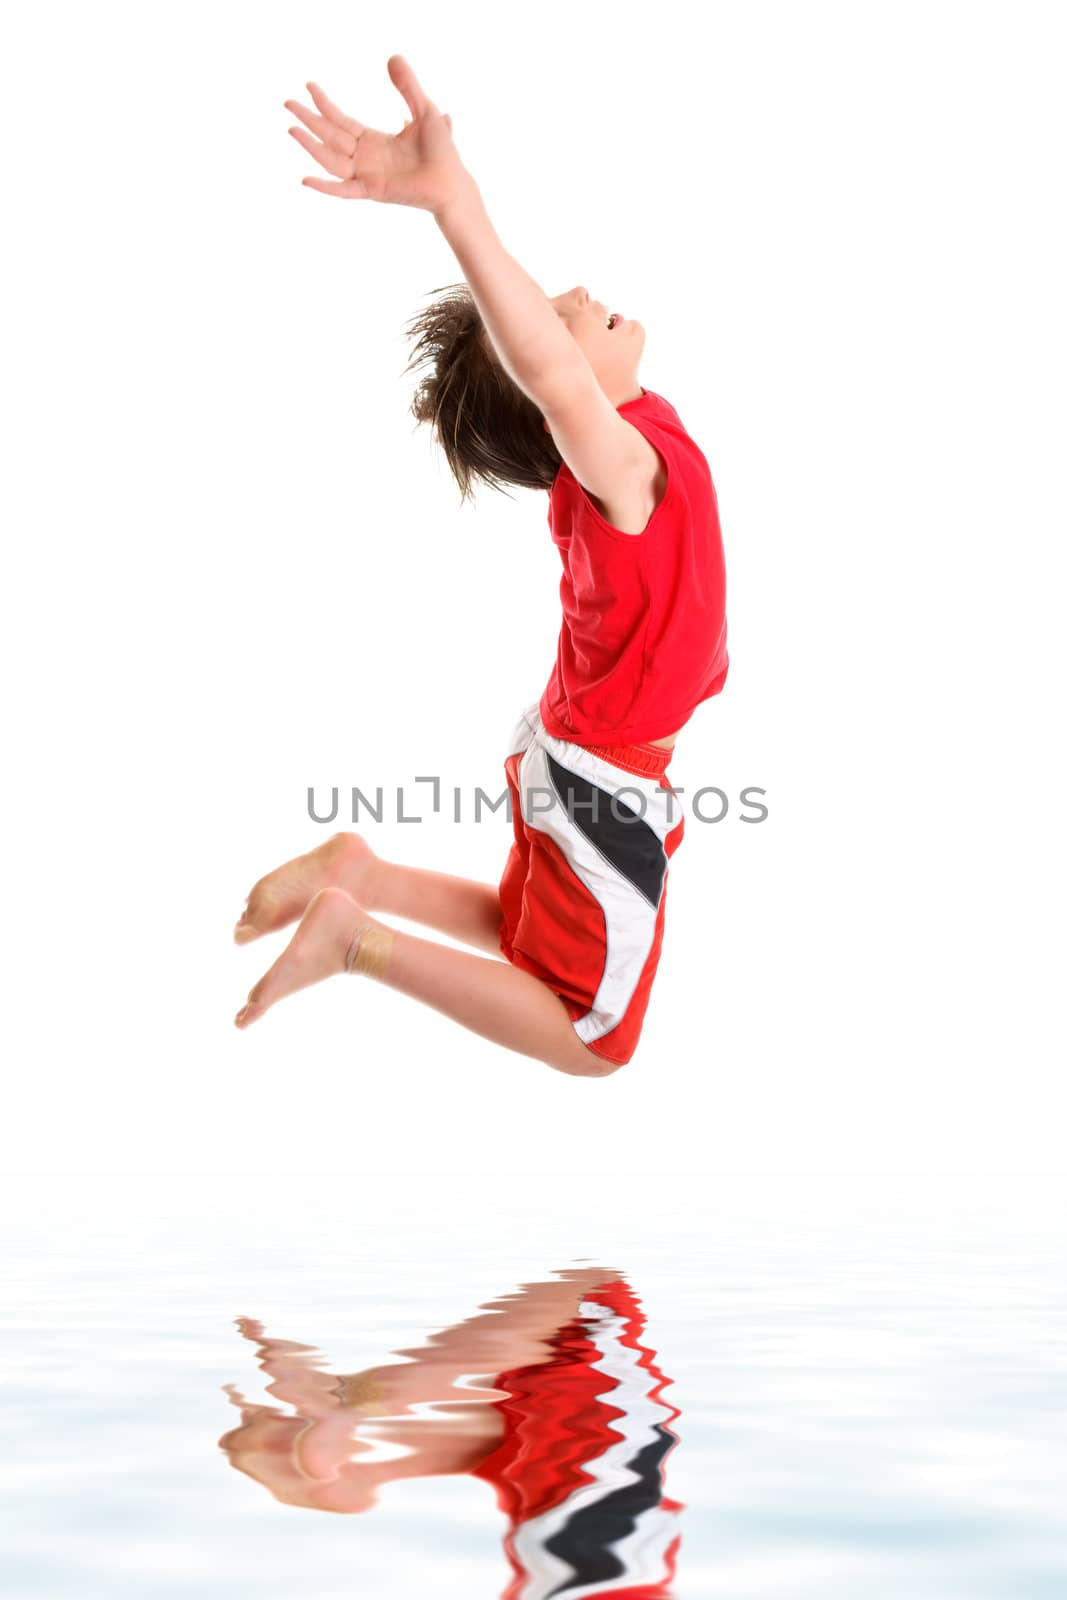 A happy boy leaps mid jump with hands stretched towards the sky.